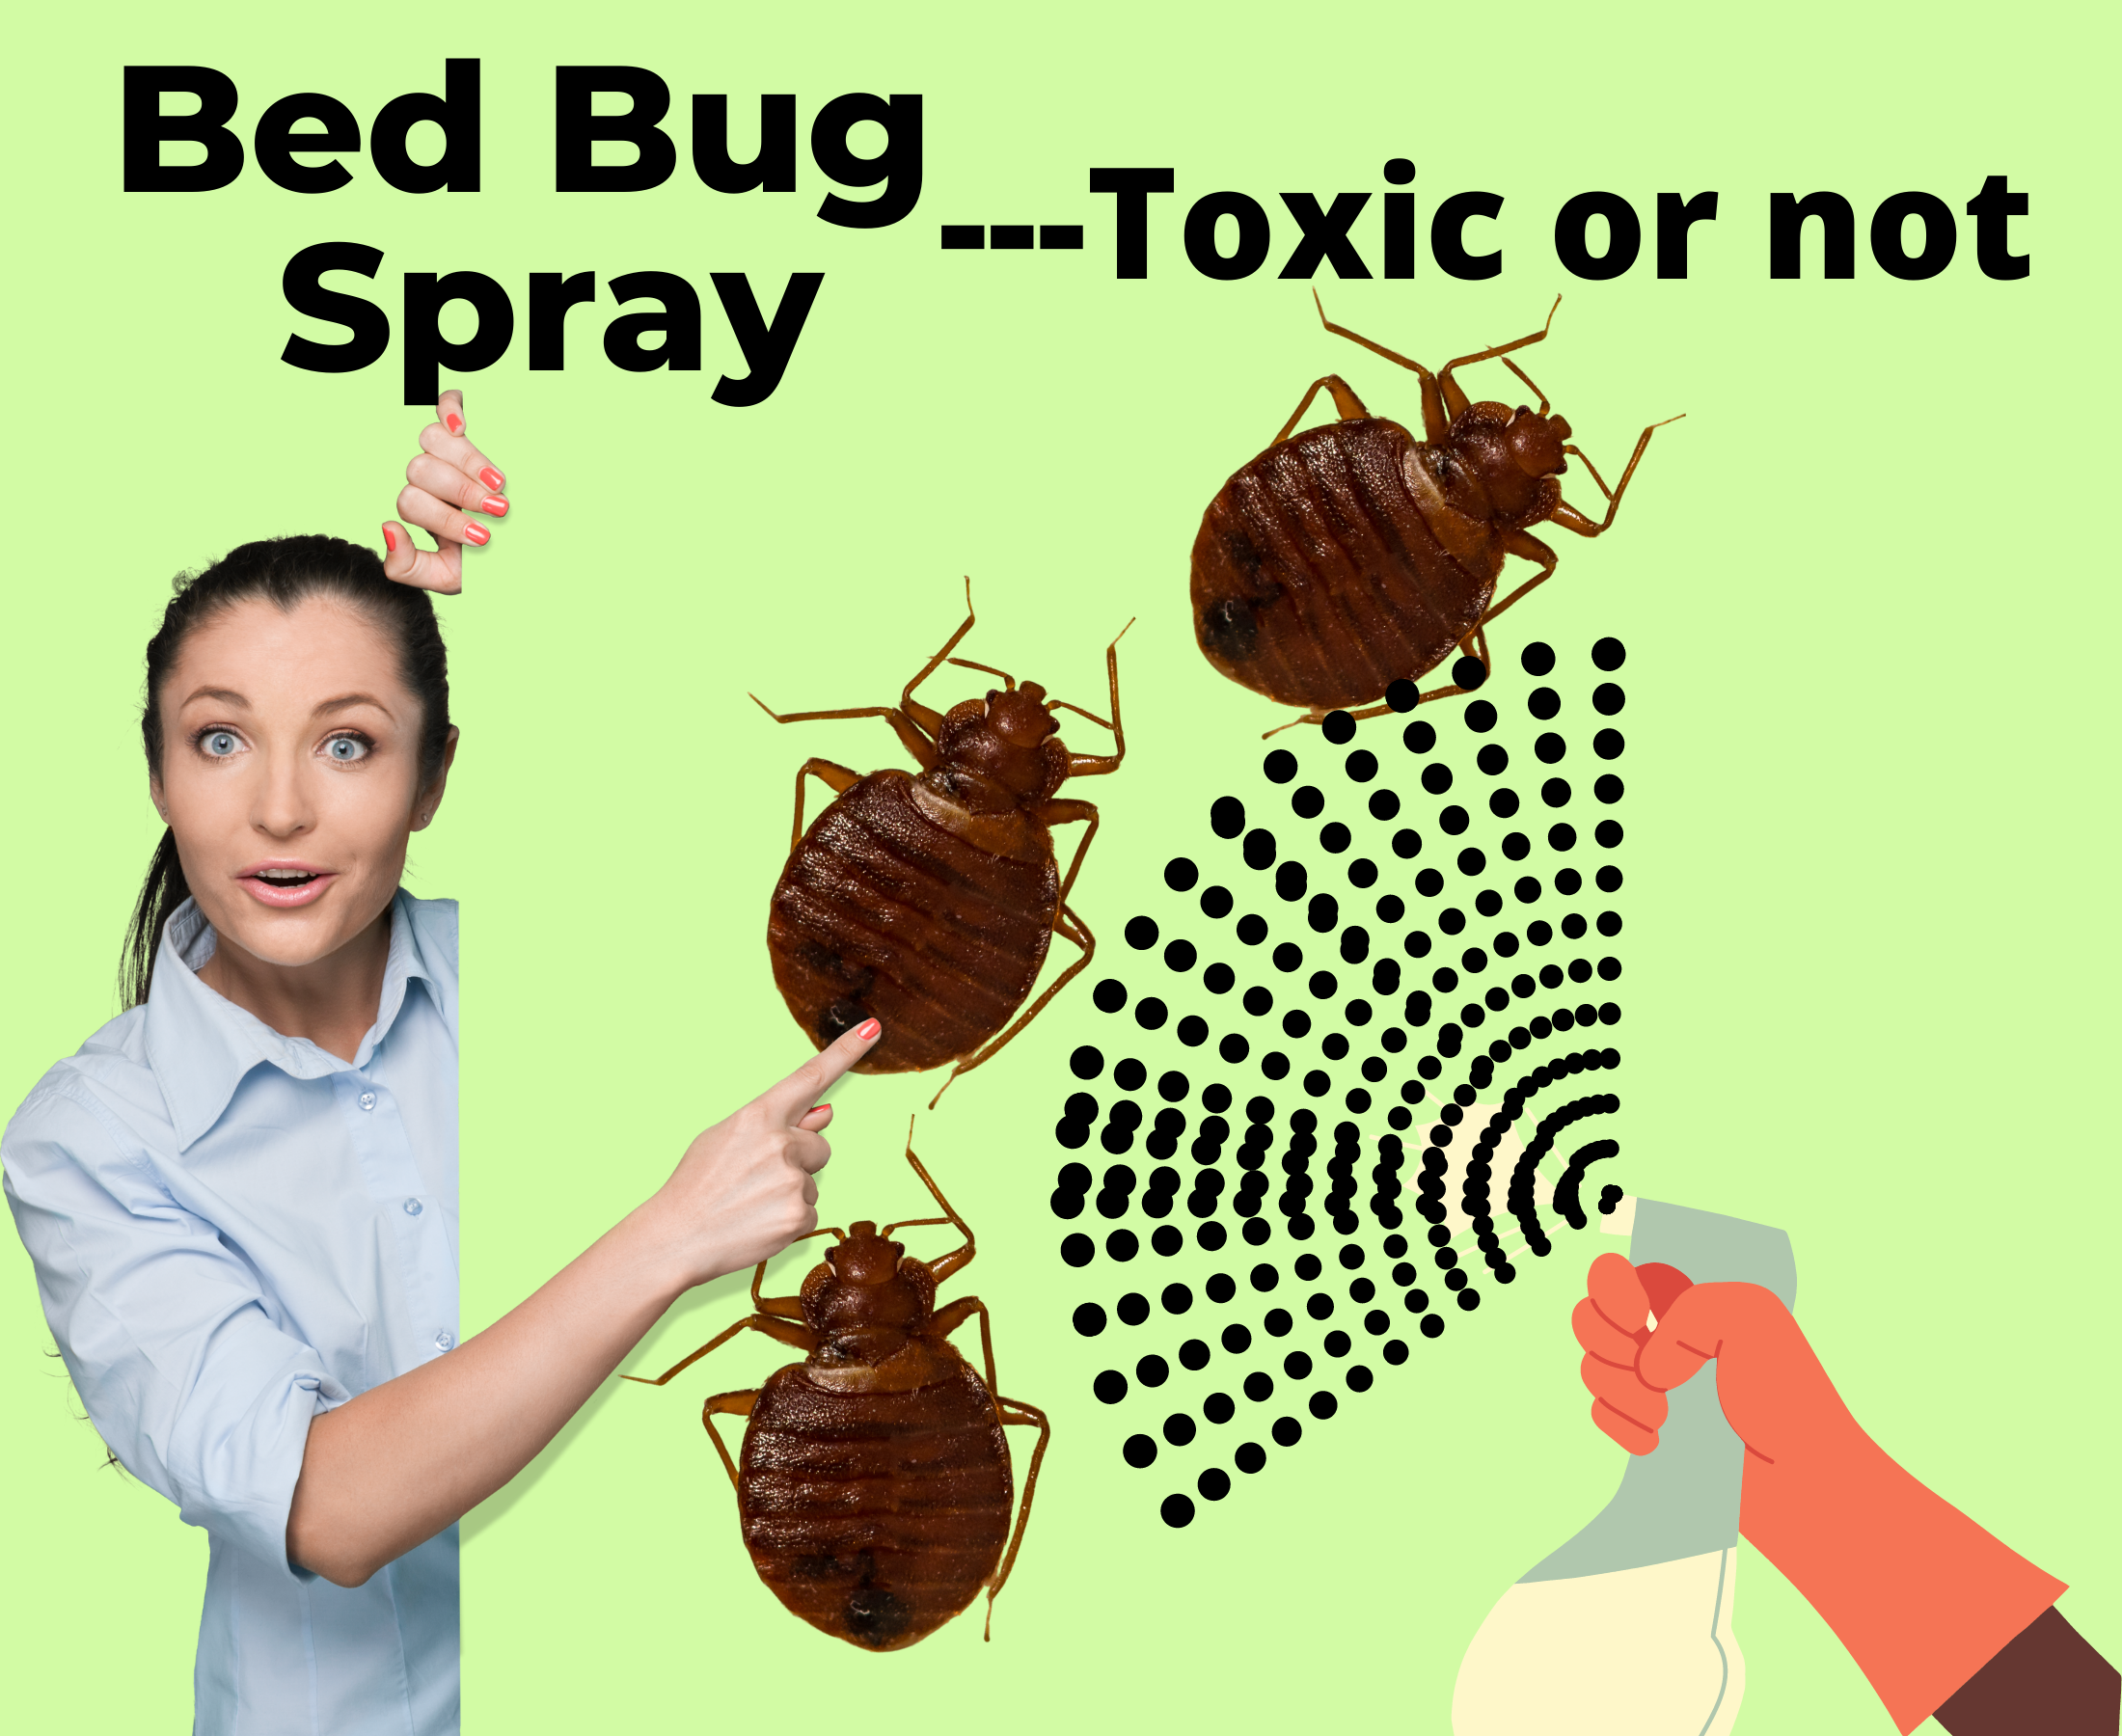 How many days do items need to be isolated, sprayed by bed bug killer?